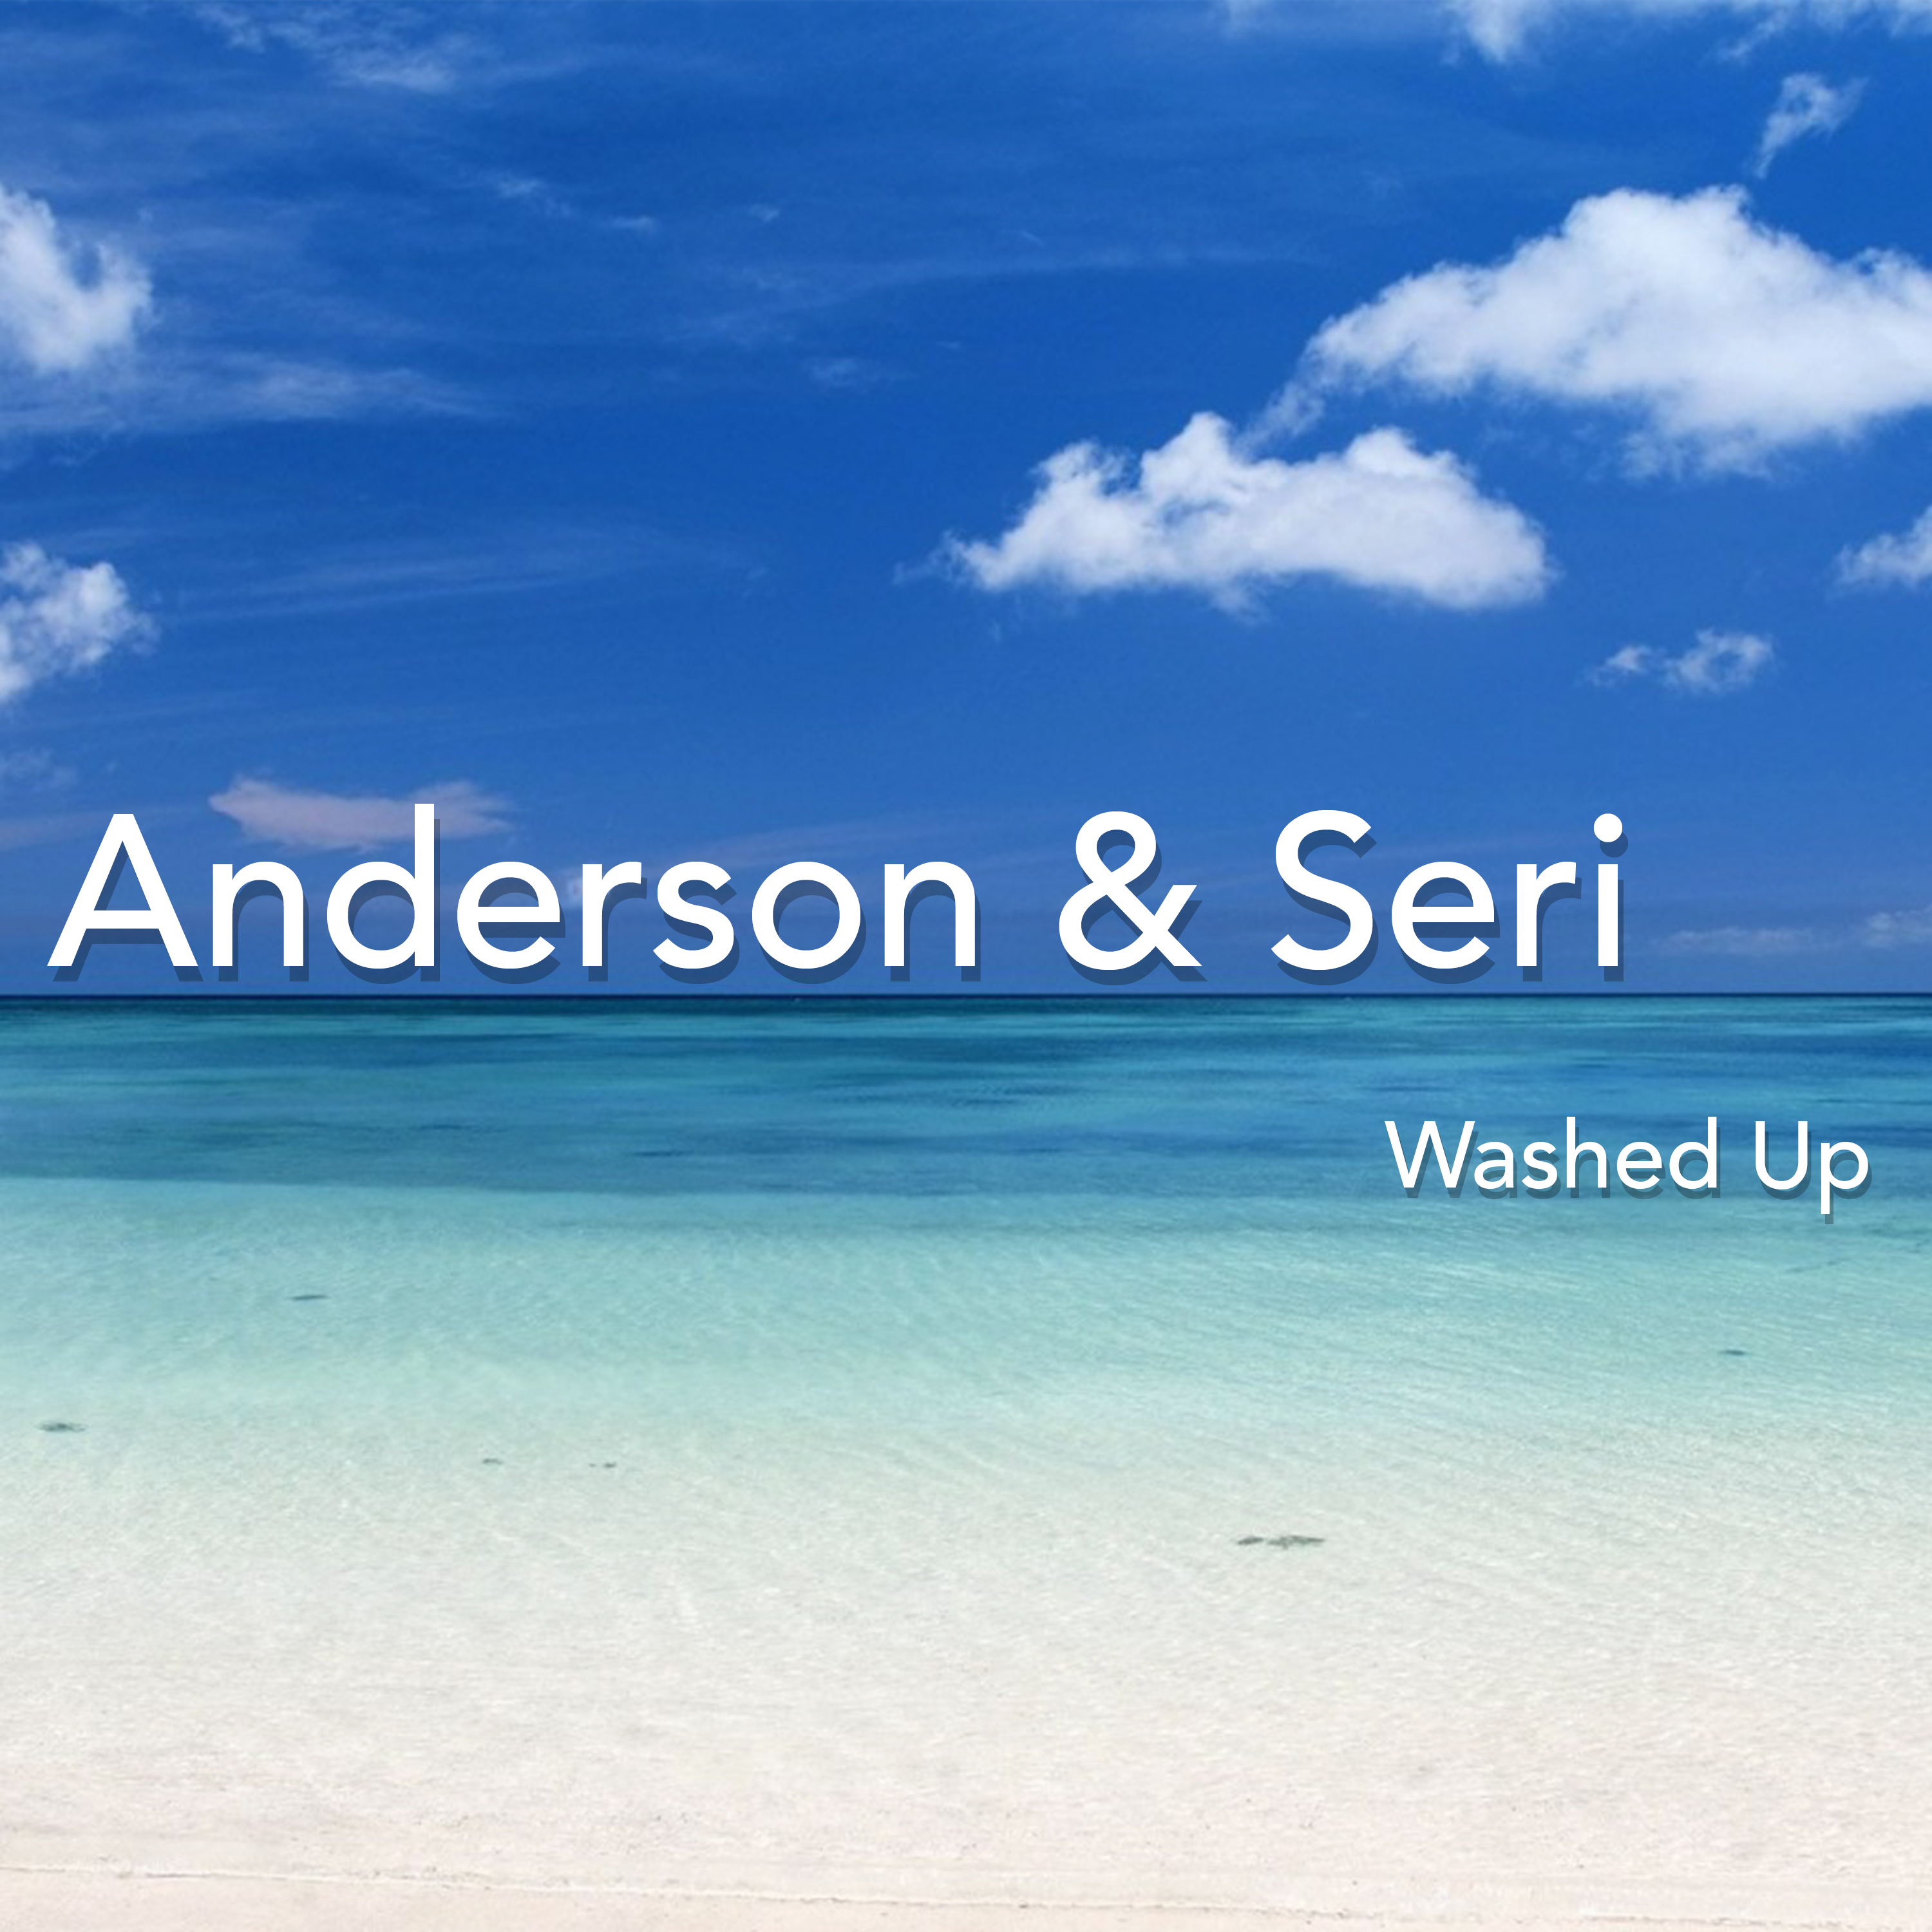 Anderson & Seri - Washed Up - Cover Art